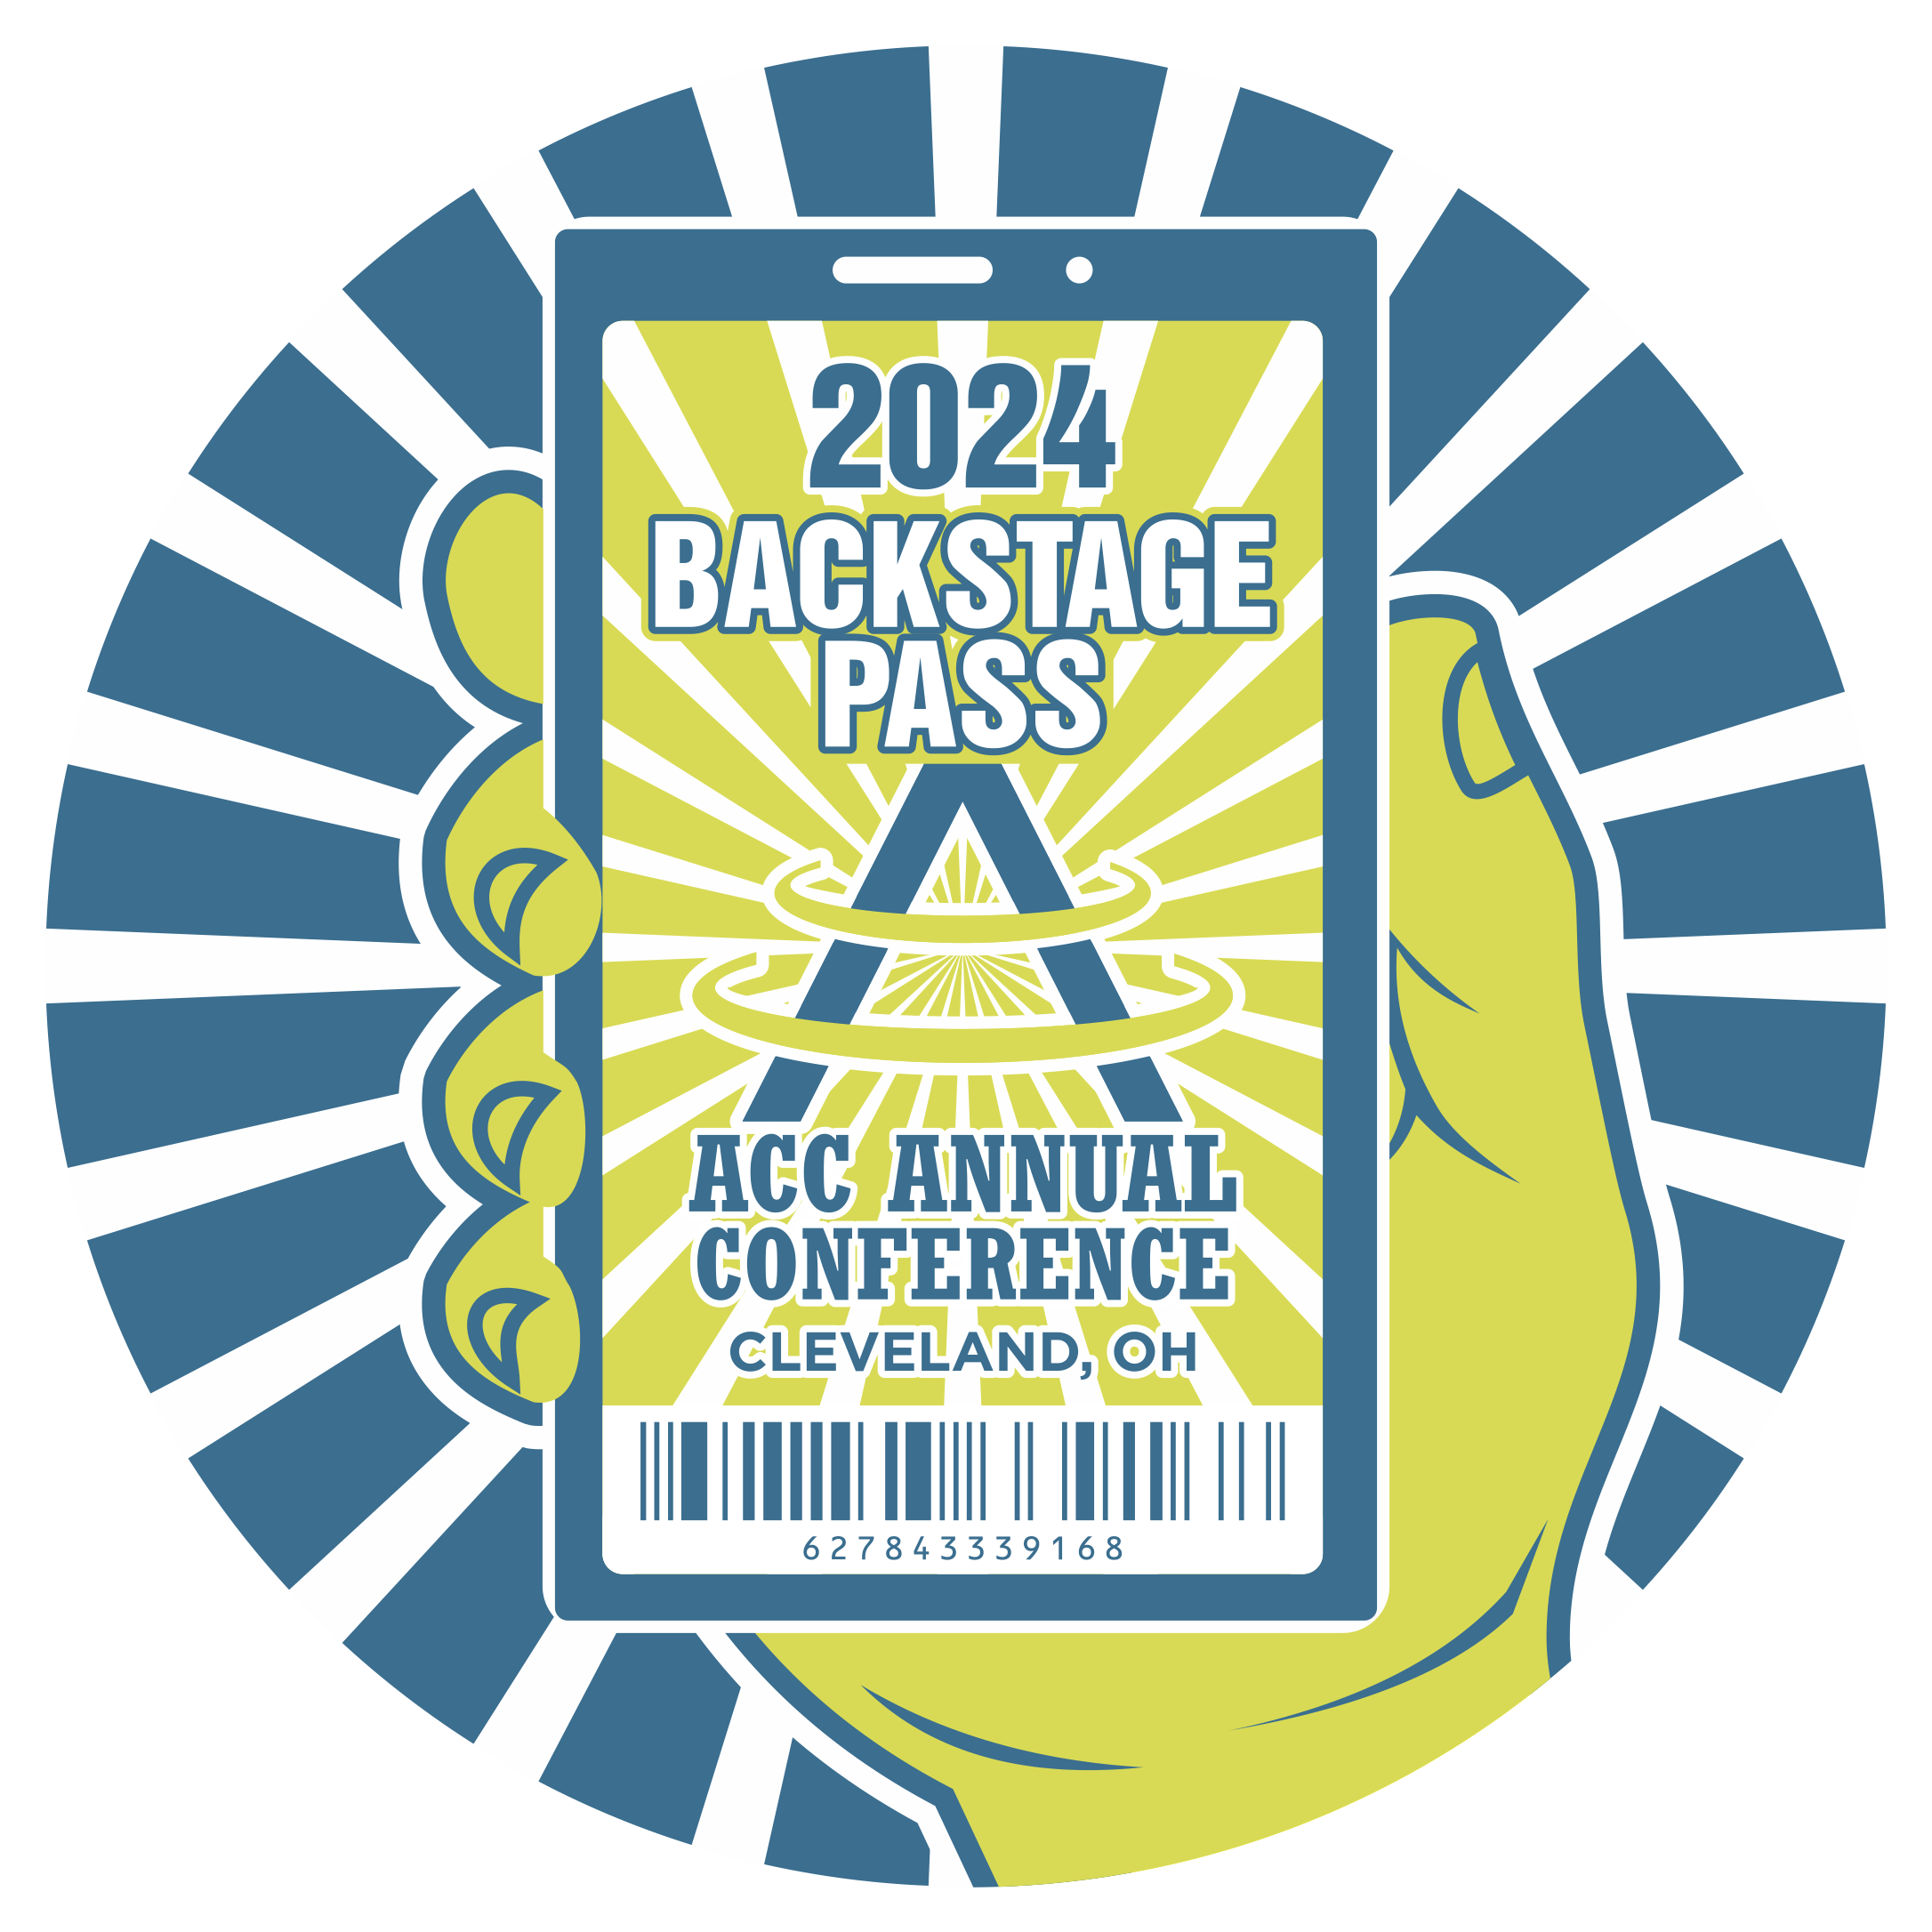 ACC Annual Conference Logo